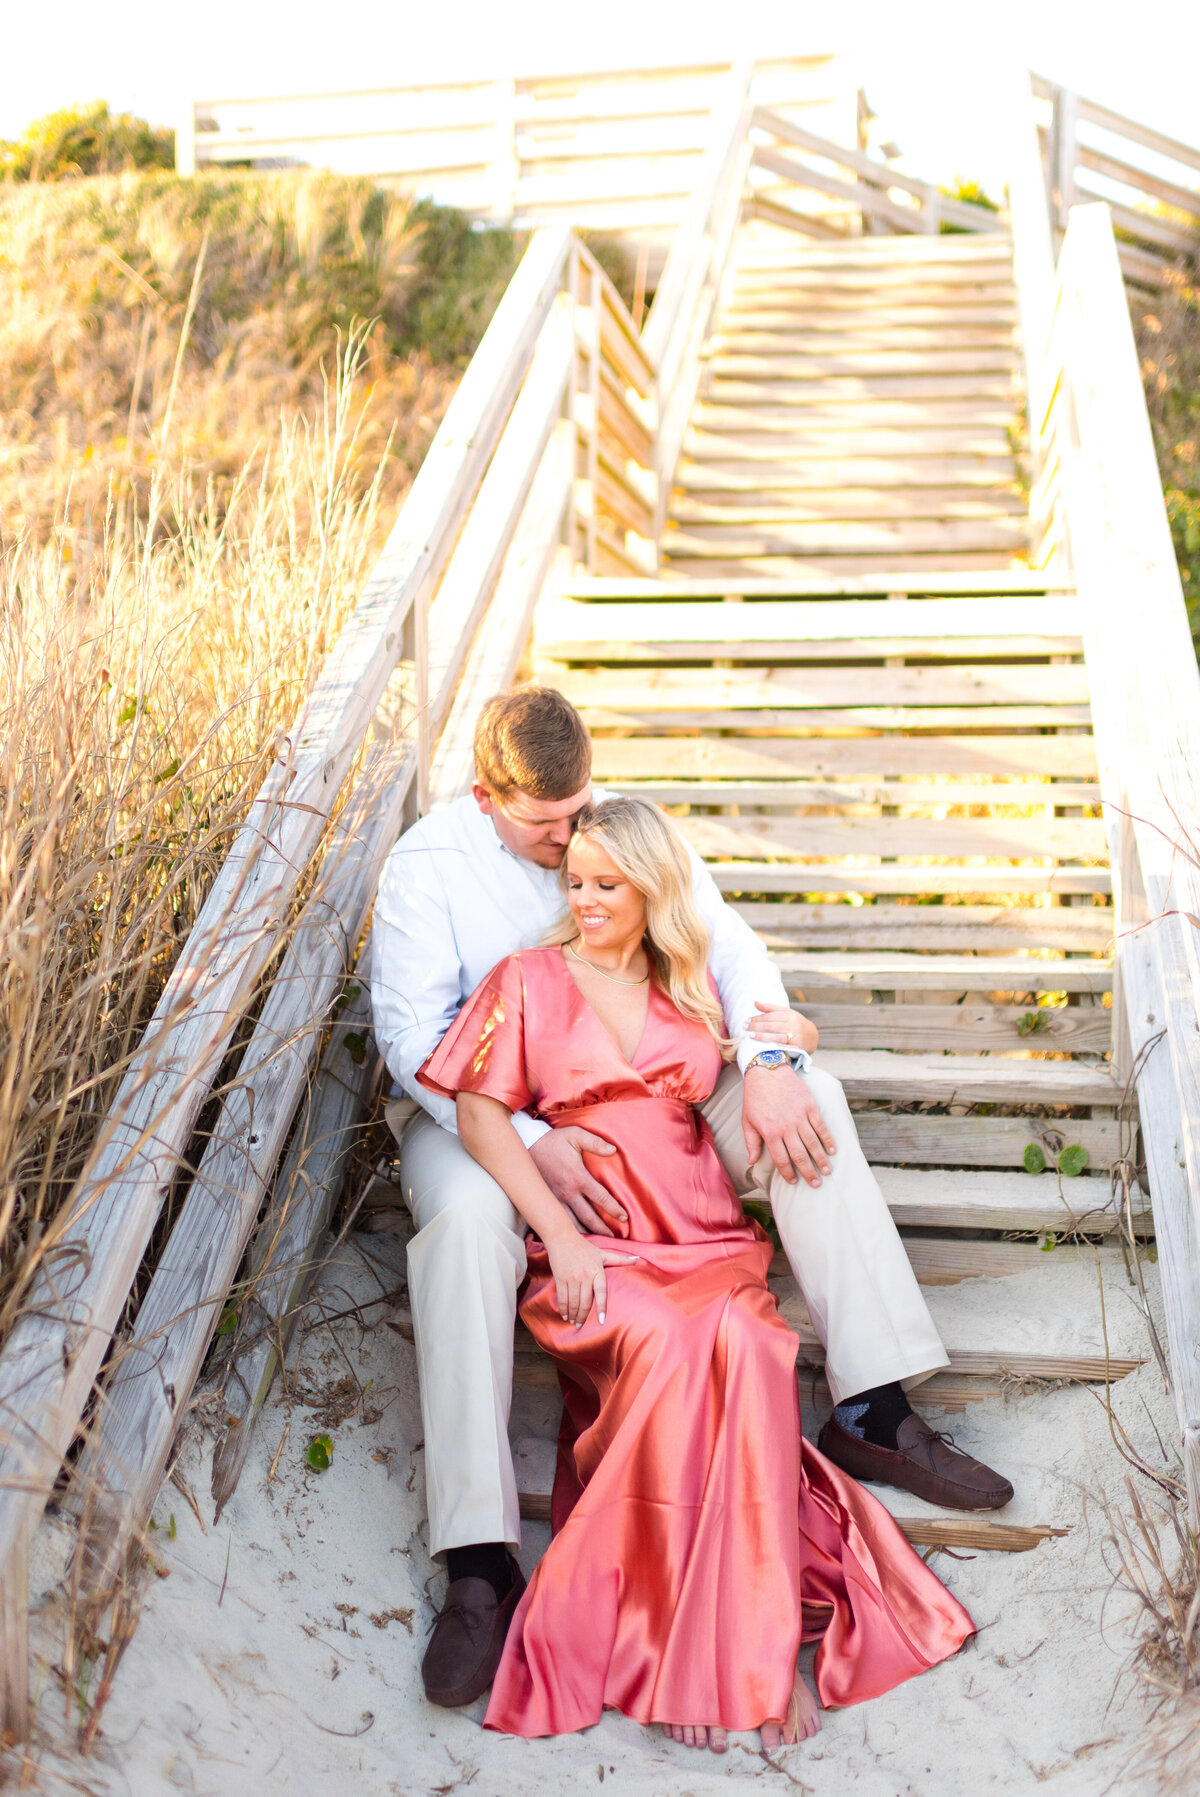 Katie + Tanner Engagement Session - Photography by Gerri Anna-128